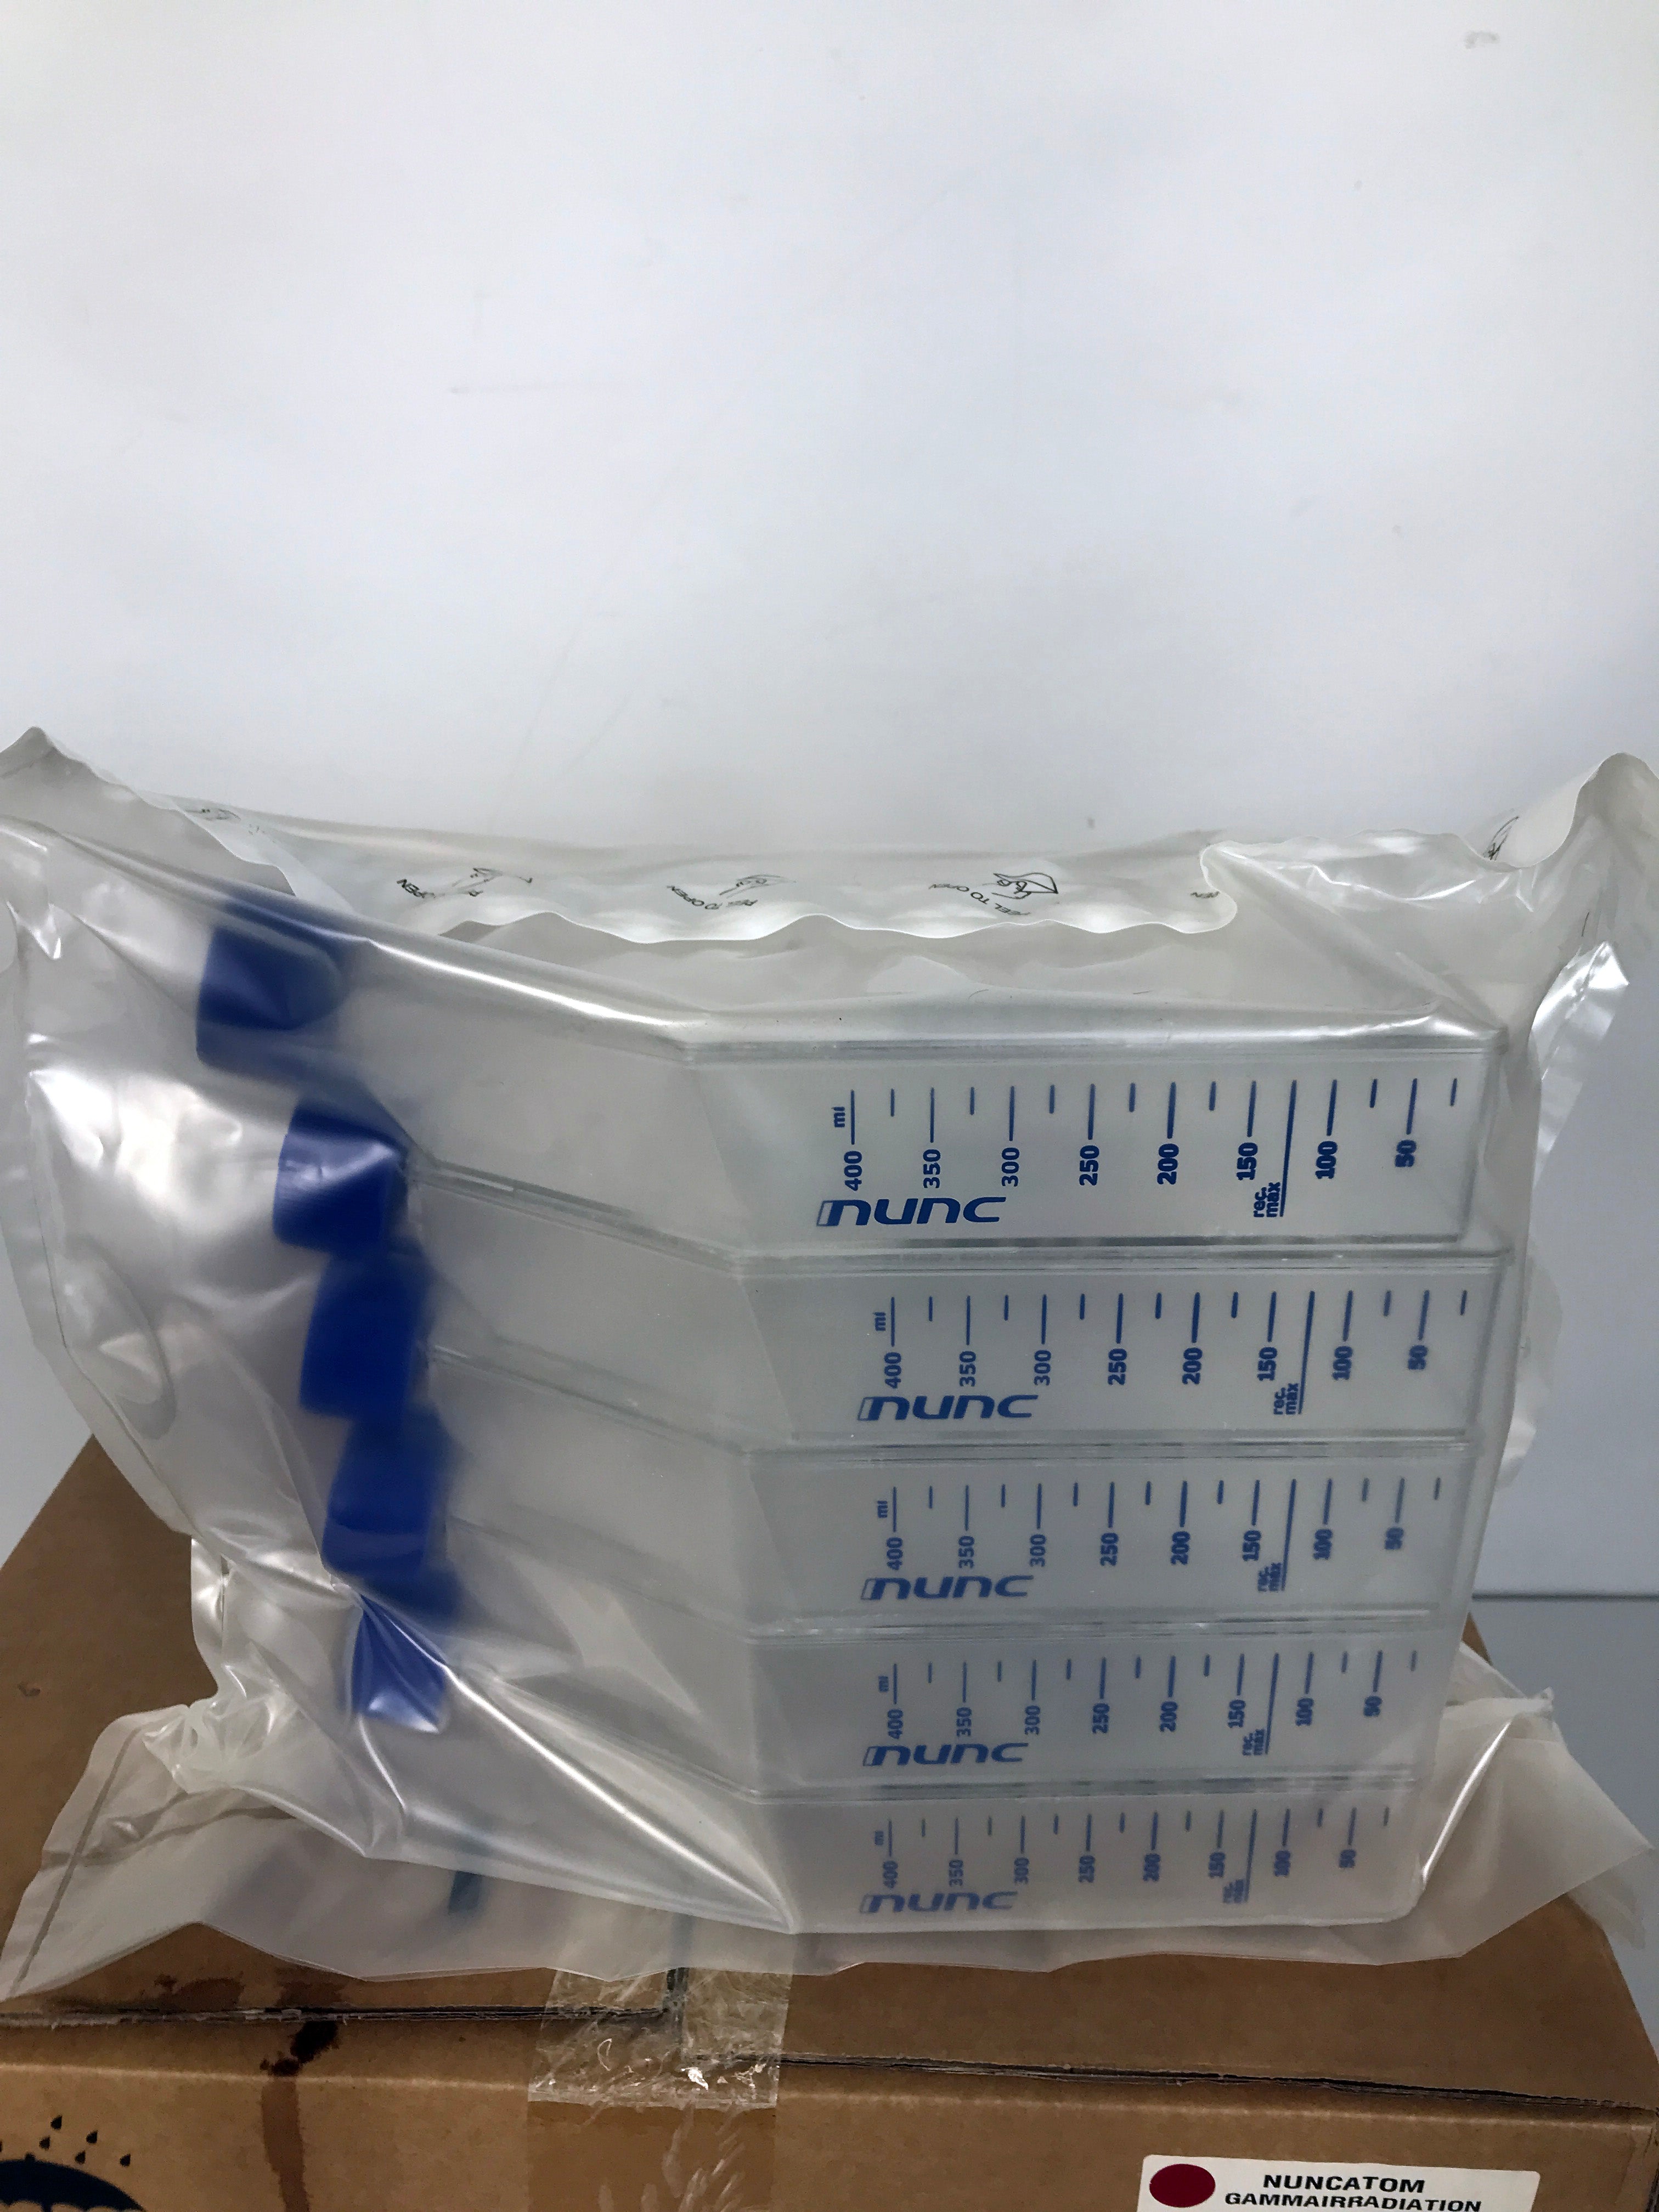 Case of 30 New Thermo Scientific Nunc EasyFlask Cell Culture Flasks 175cm 159920